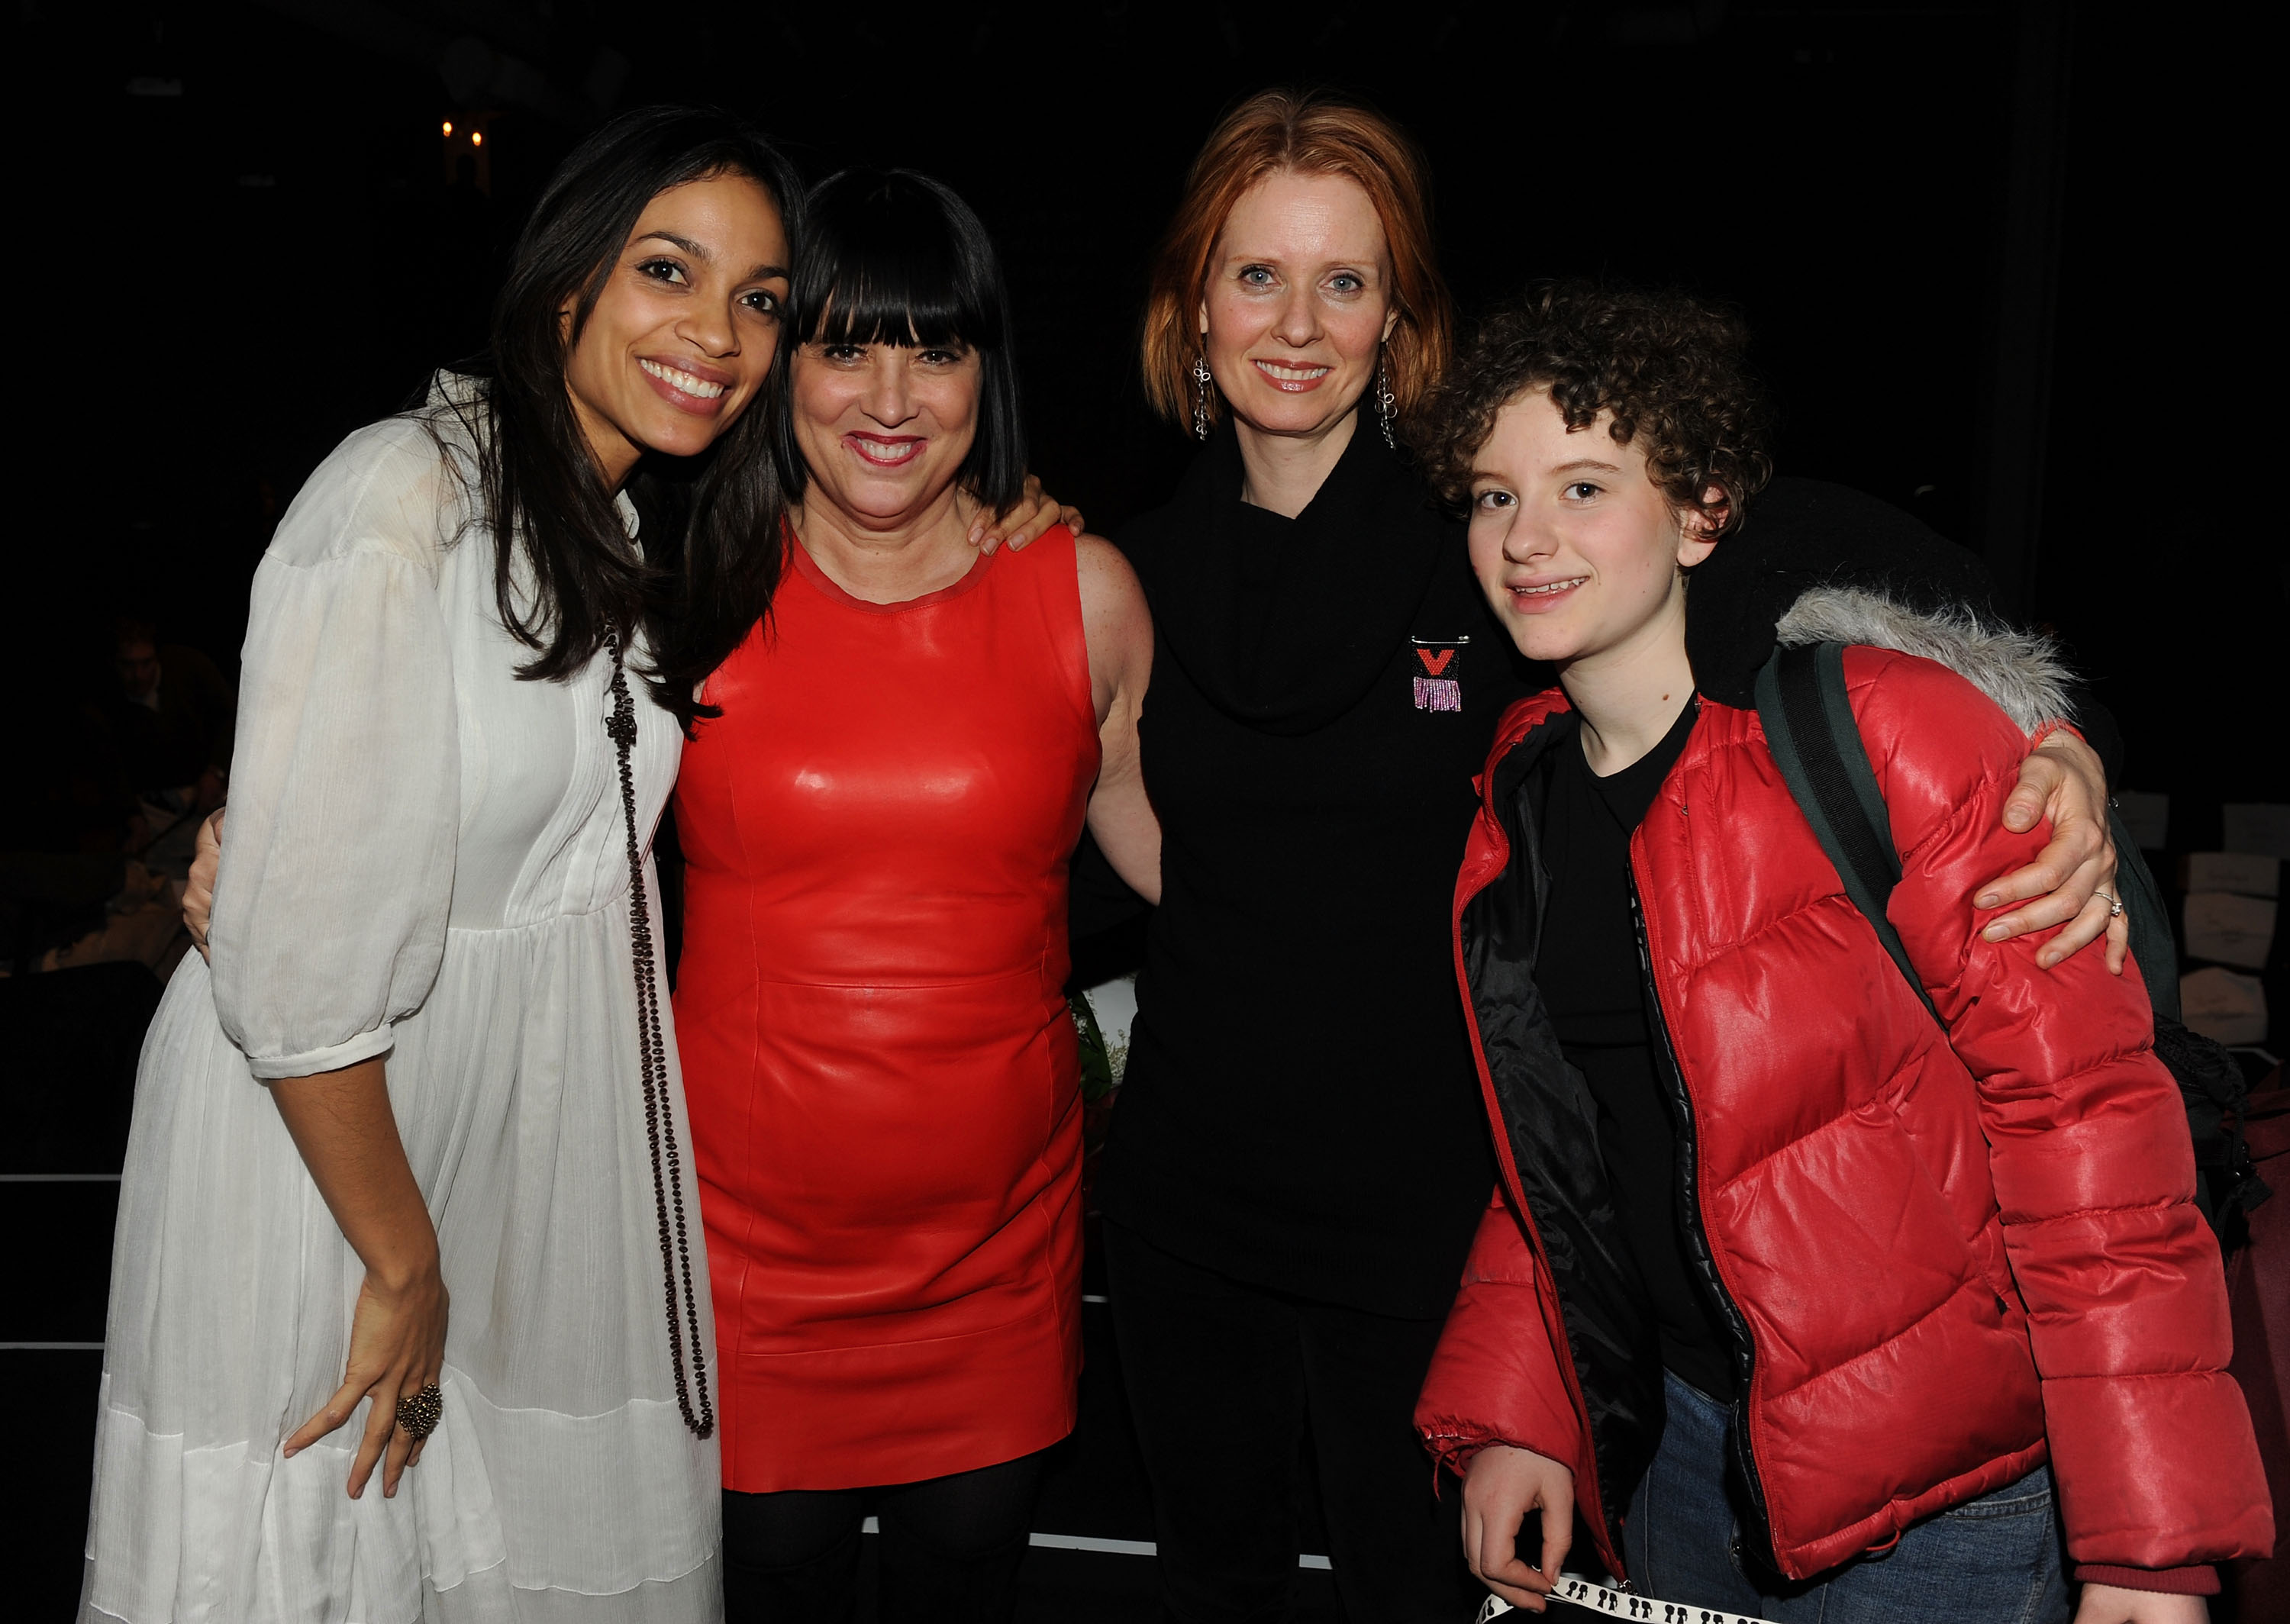 Actress Rosario Dawson, writer Eve Ensler, actress Cynthia Nixon, and her daughter Samantha Mozes on February 5, 2010, in New York City. | Source: Getty Images